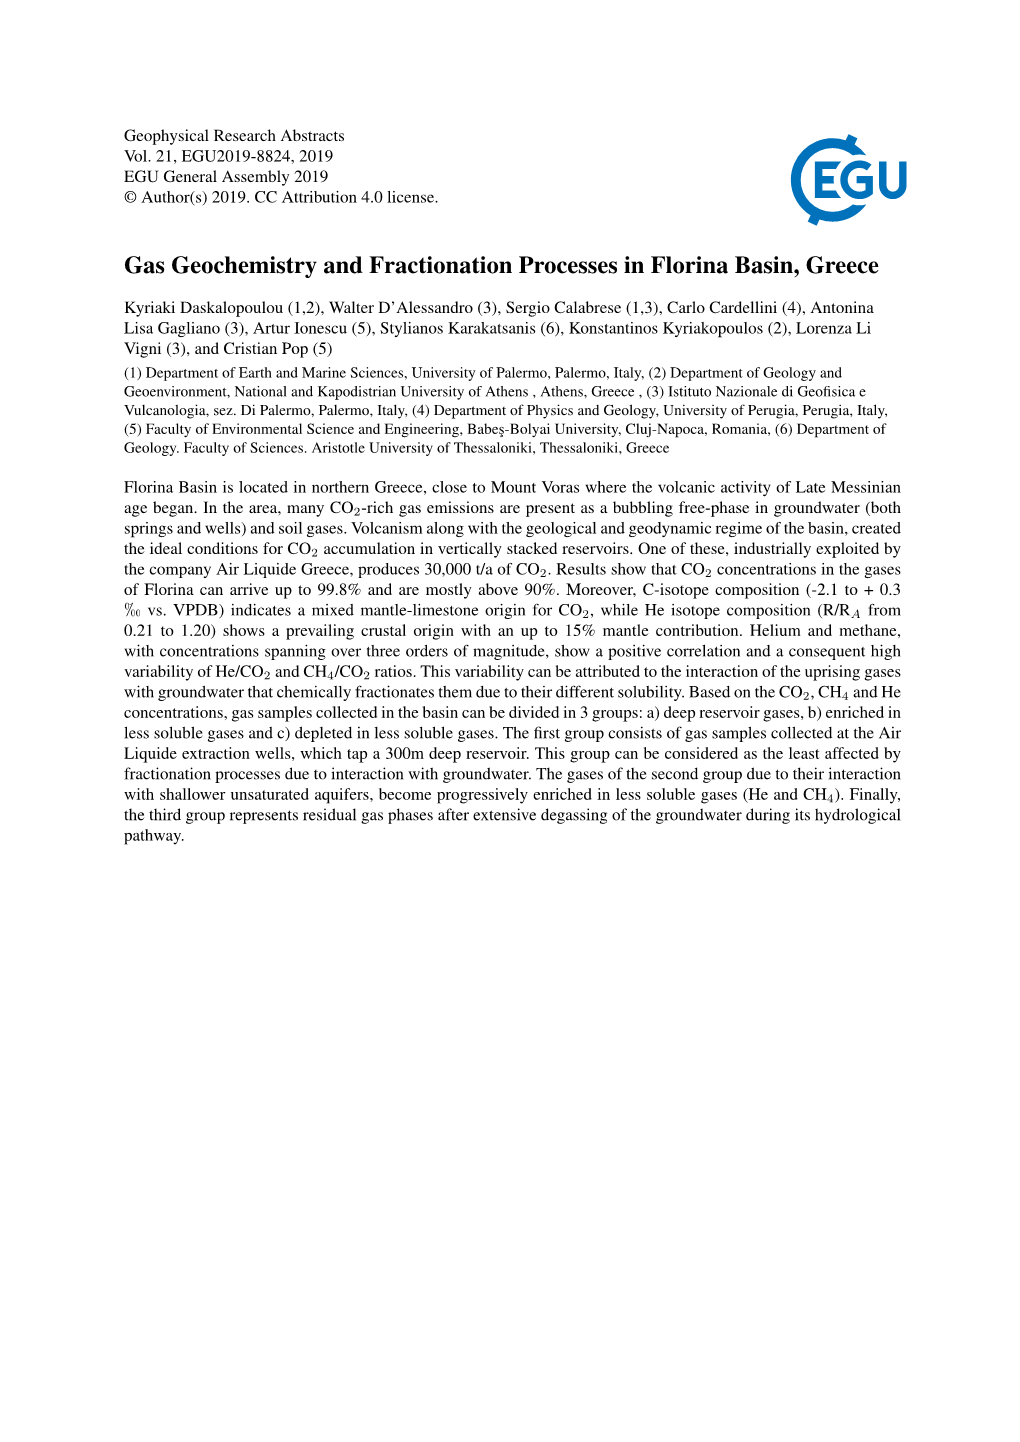 Gas Geochemistry and Fractionation Processes in Florina Basin, Greece